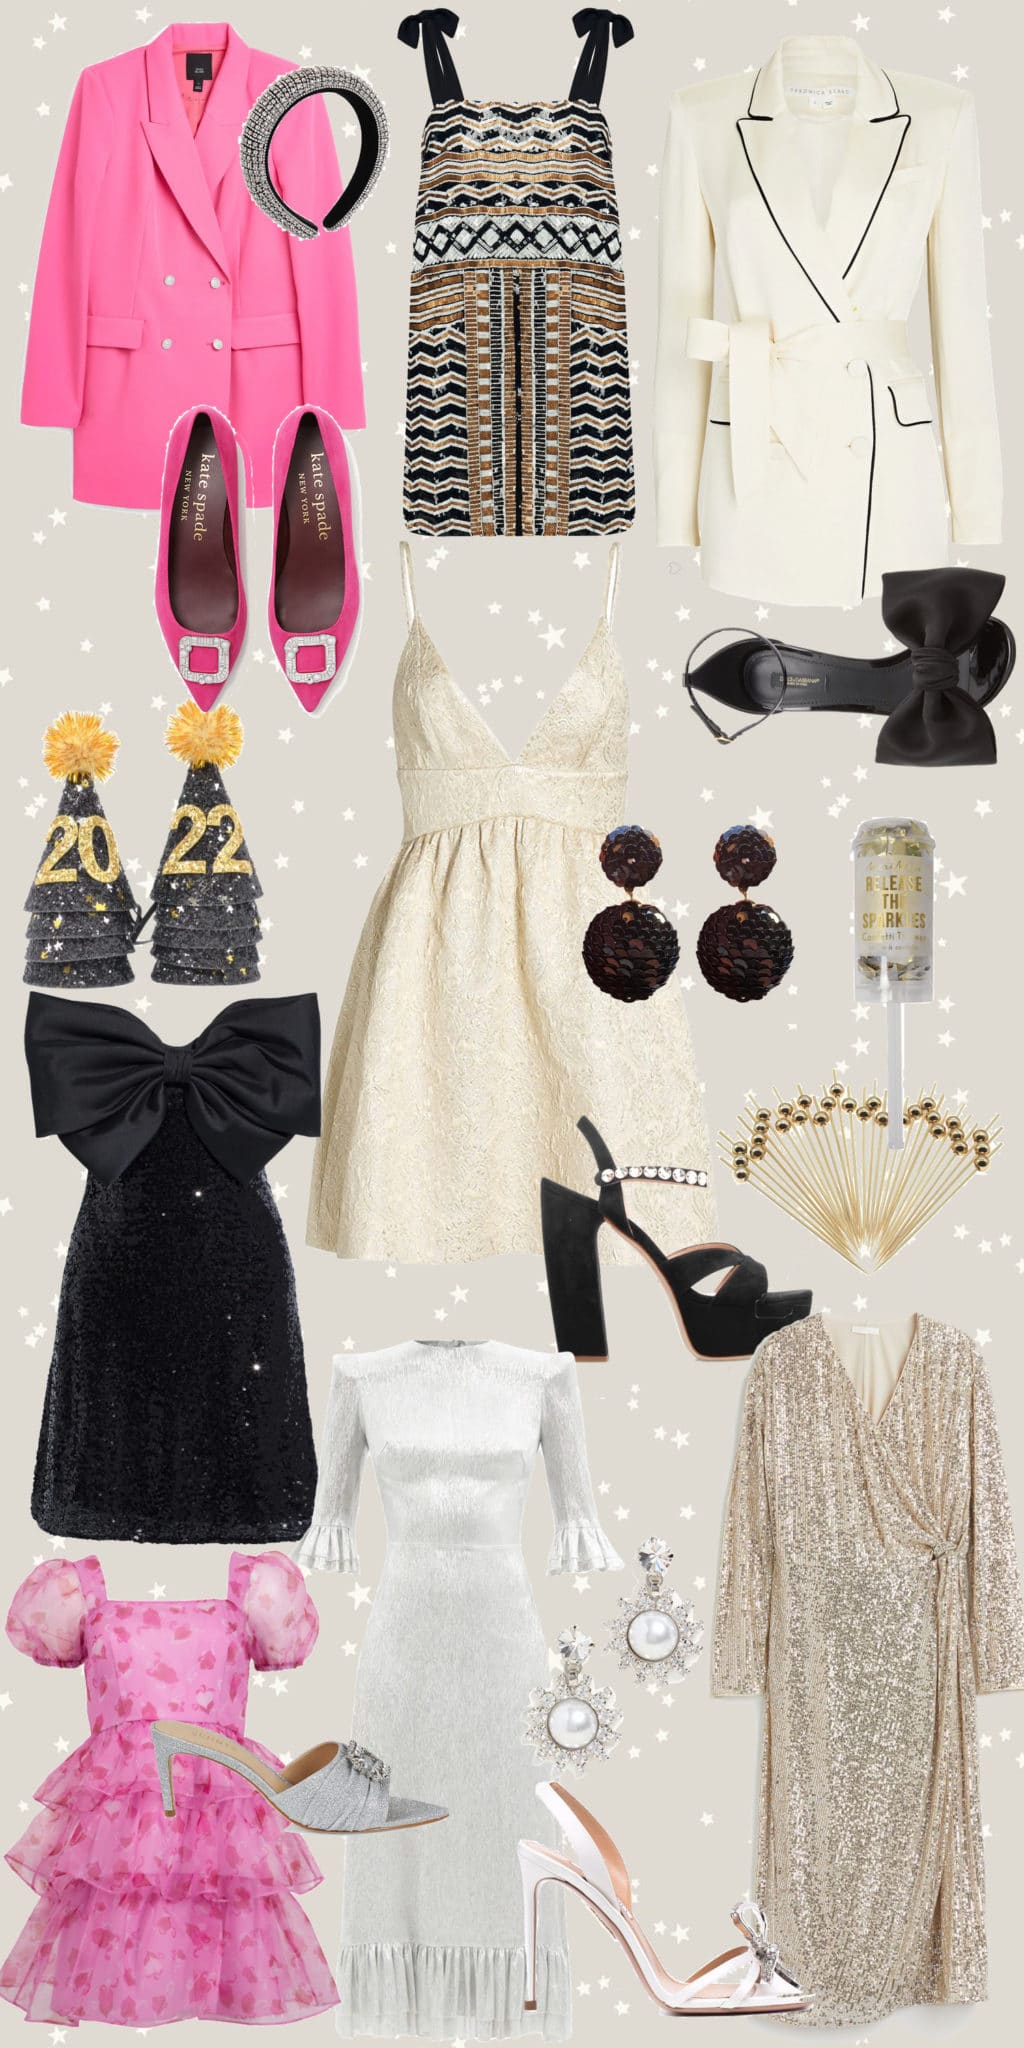 new years eve outfits